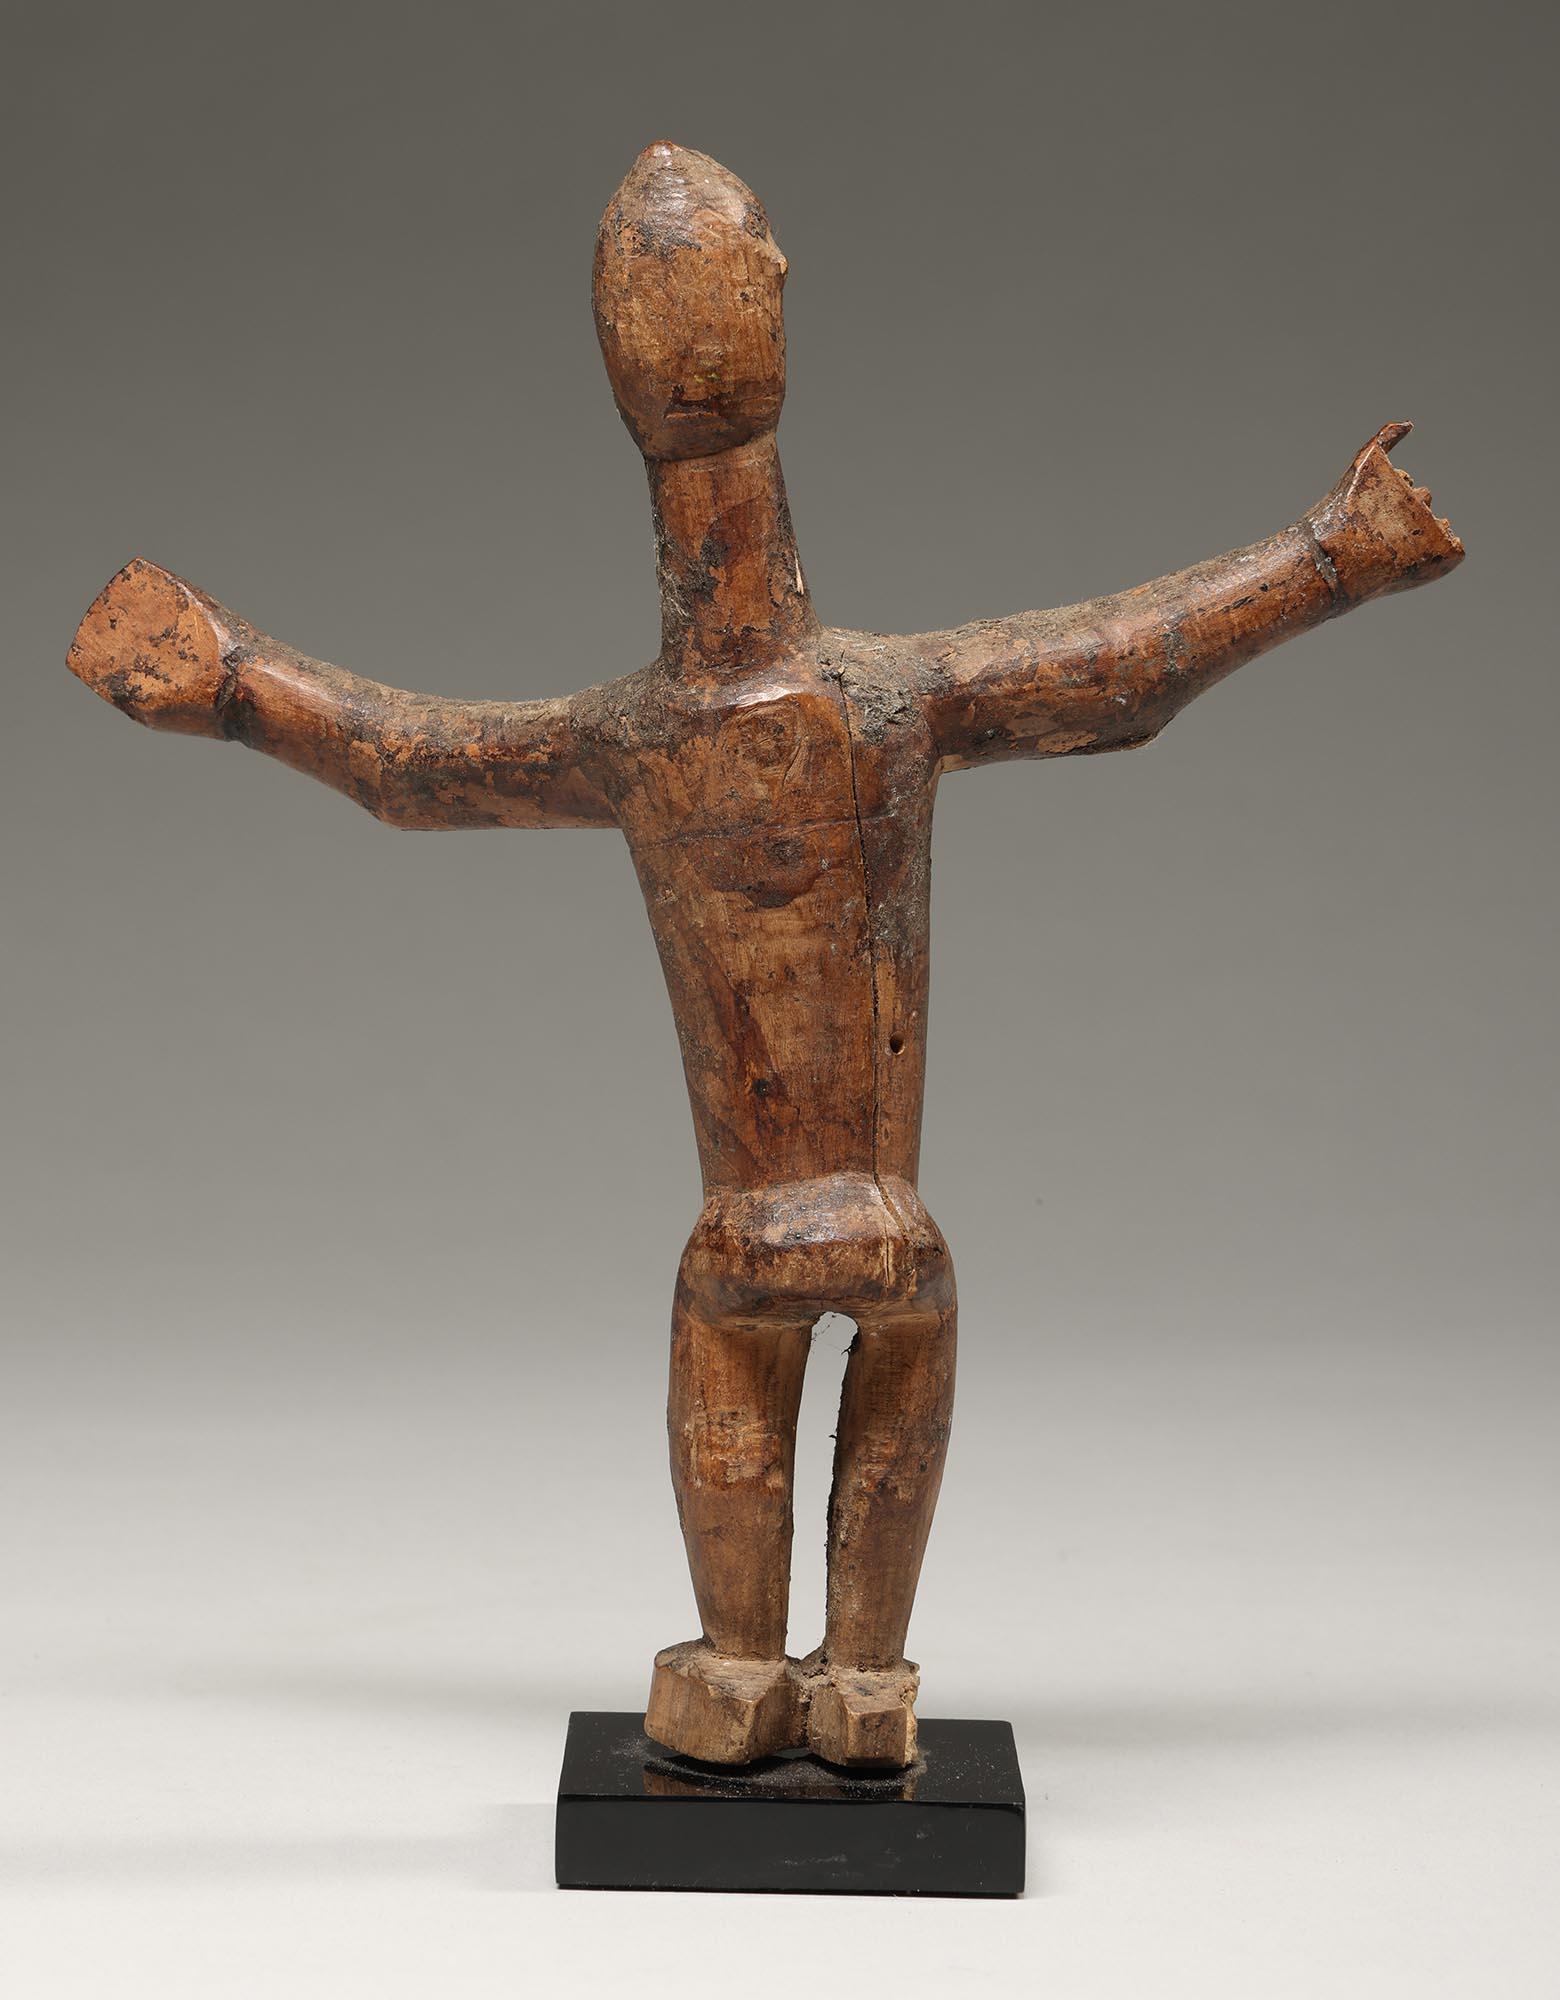 Small Dancing Lobi Figure With Arms Out, Cubist Face Ghana West Africa ex Willis In Fair Condition For Sale In Point Richmond, CA